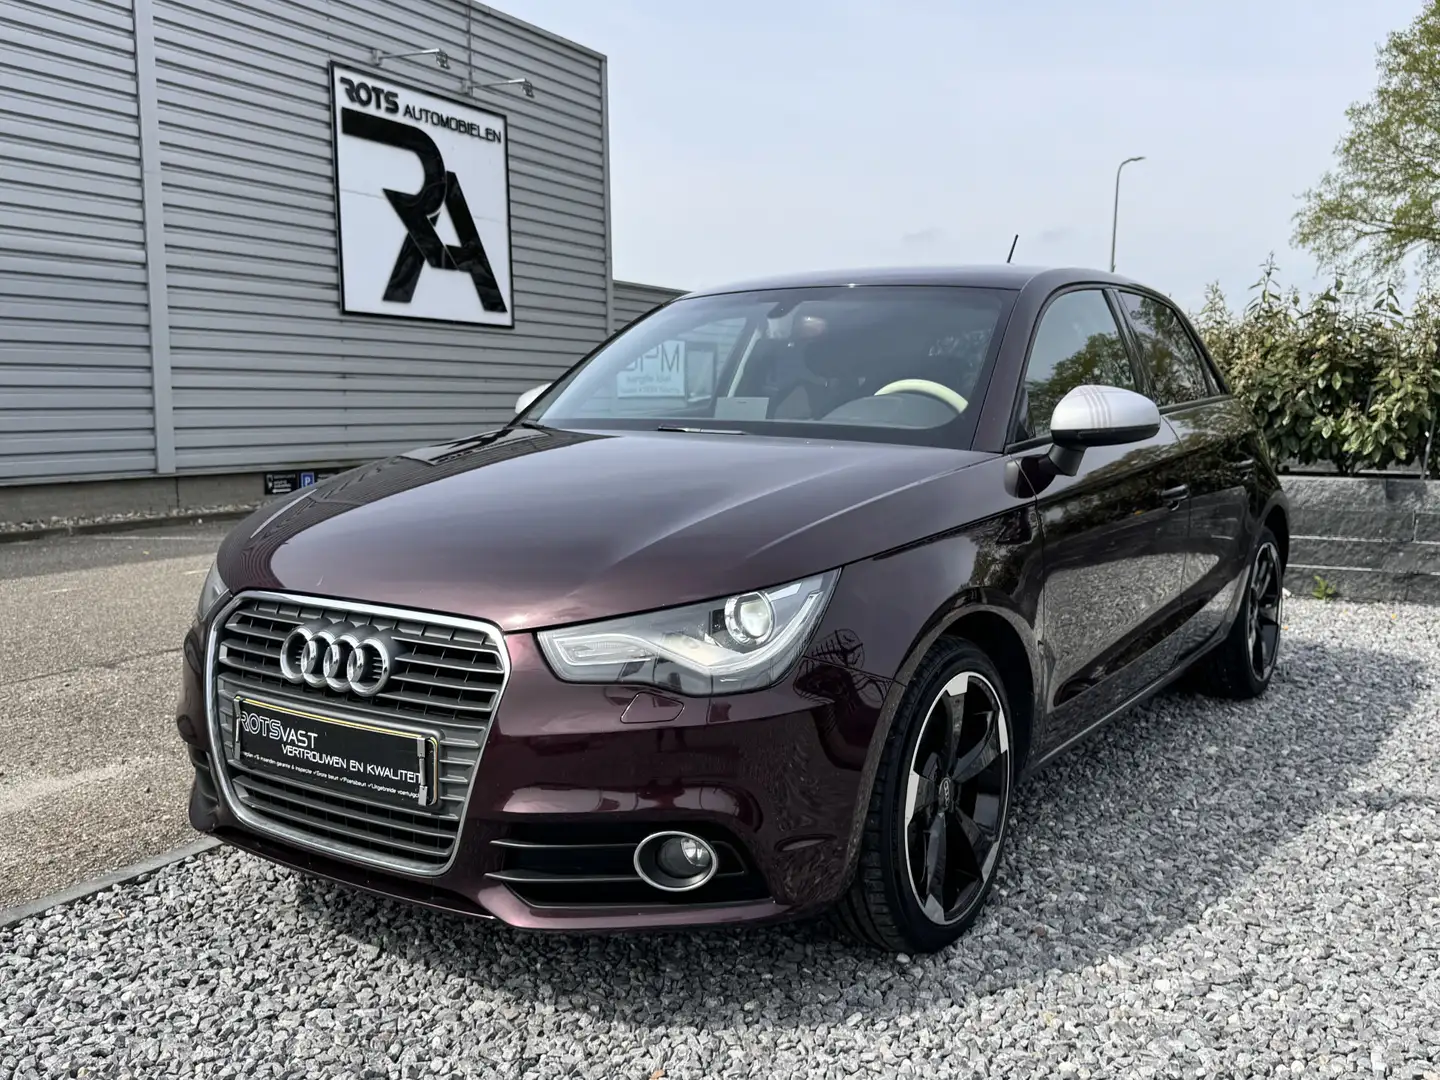 Audi A1 Sportback 1.4 TFSI Speciale uitvoering! Paars Pare Violet - 2